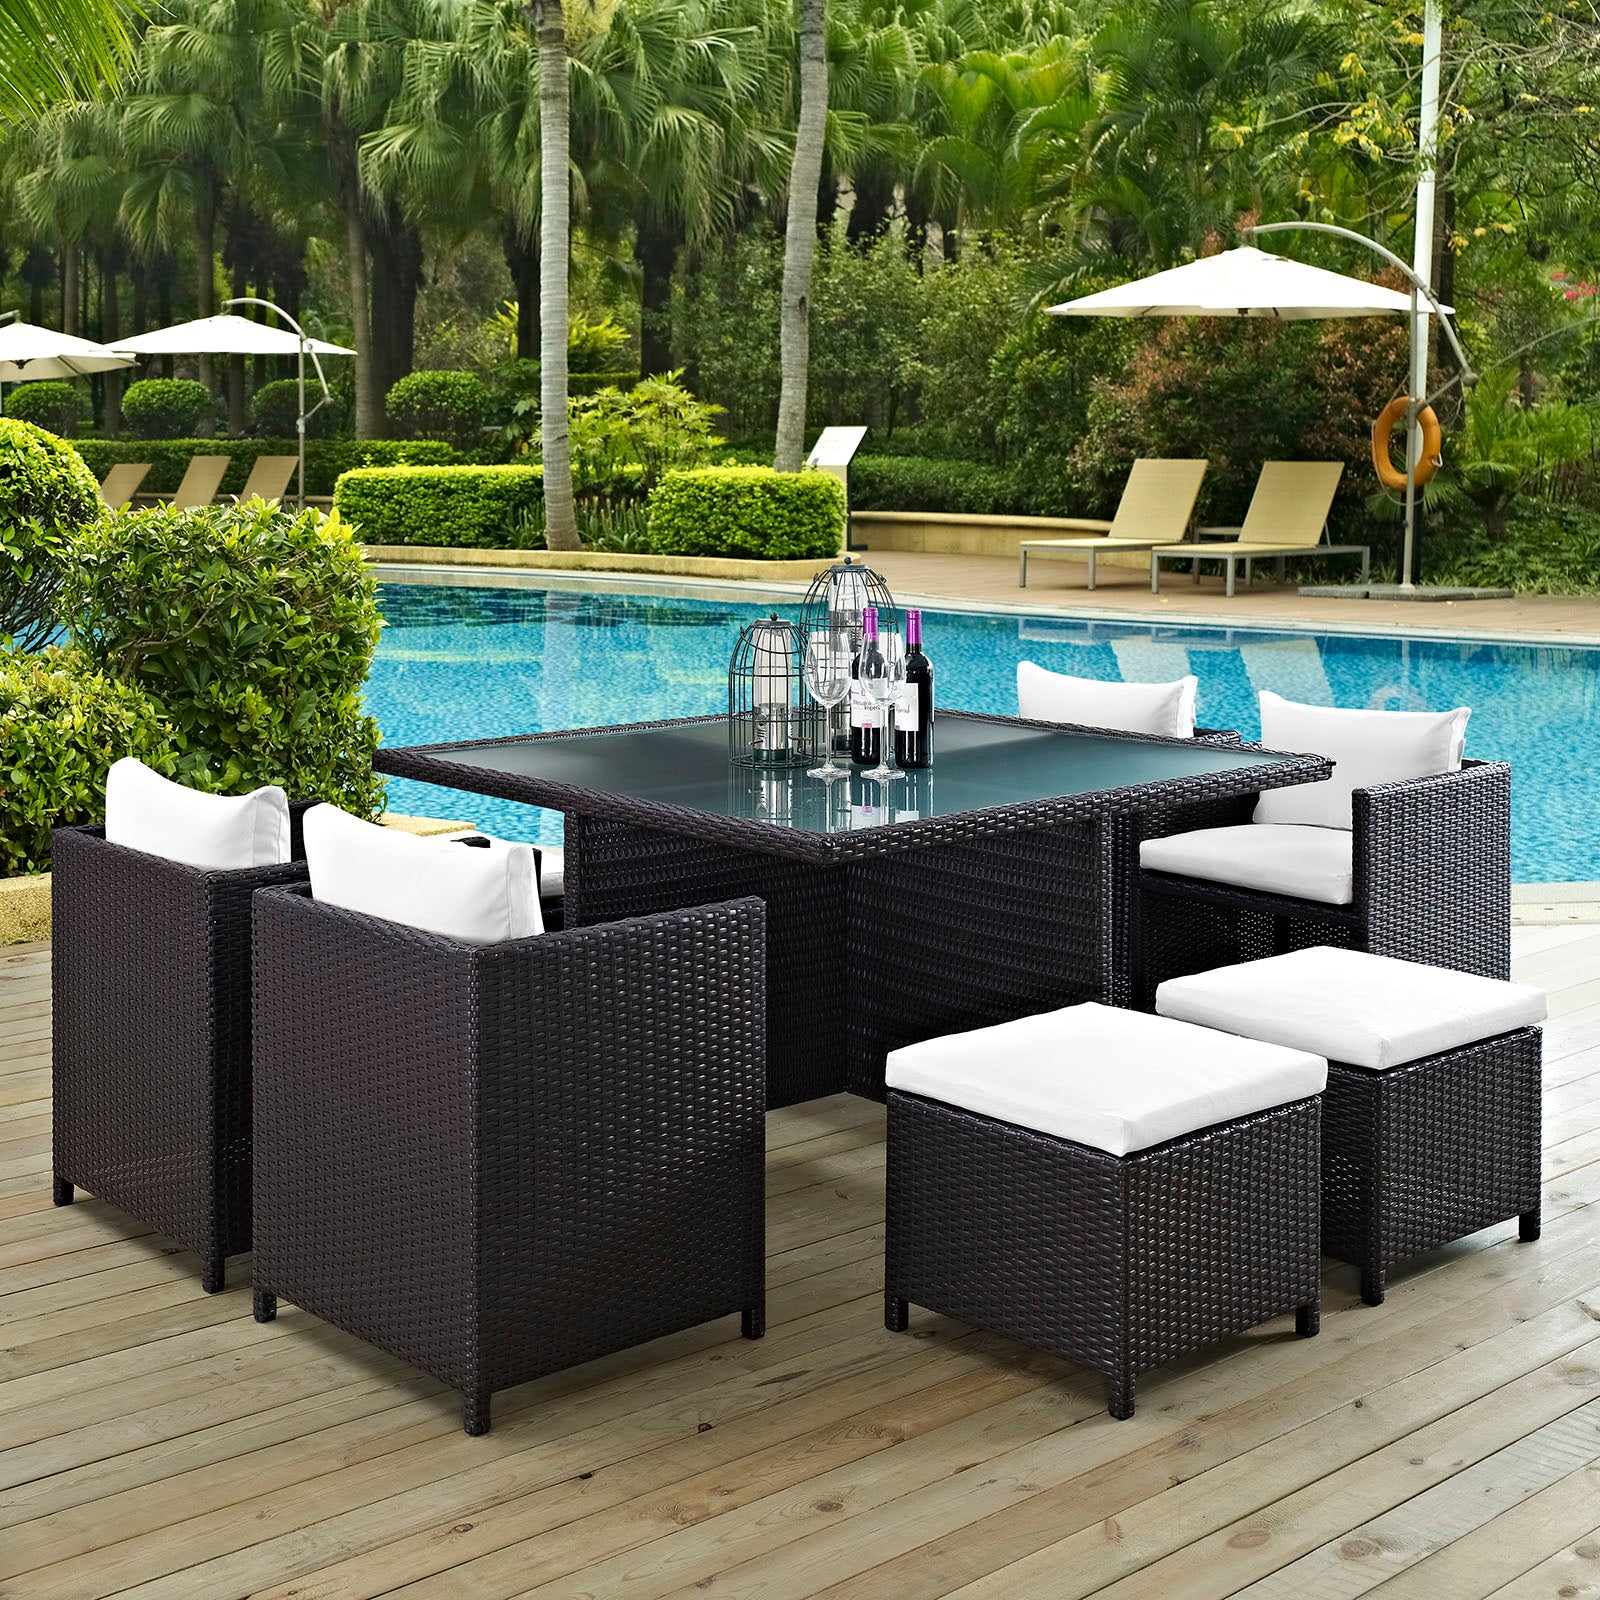 Modway Outdoor Dining Sets - Inverse 9 Piece Outdoor Patio Dining Set Espresso White